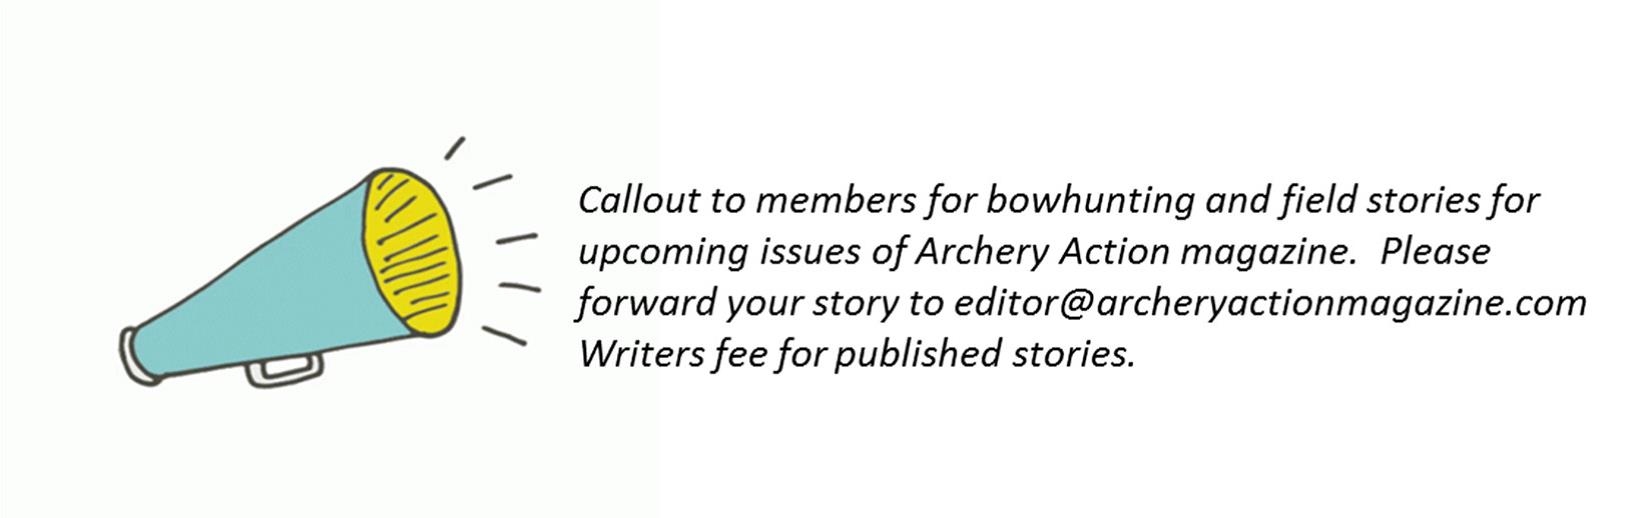 Callout for stories